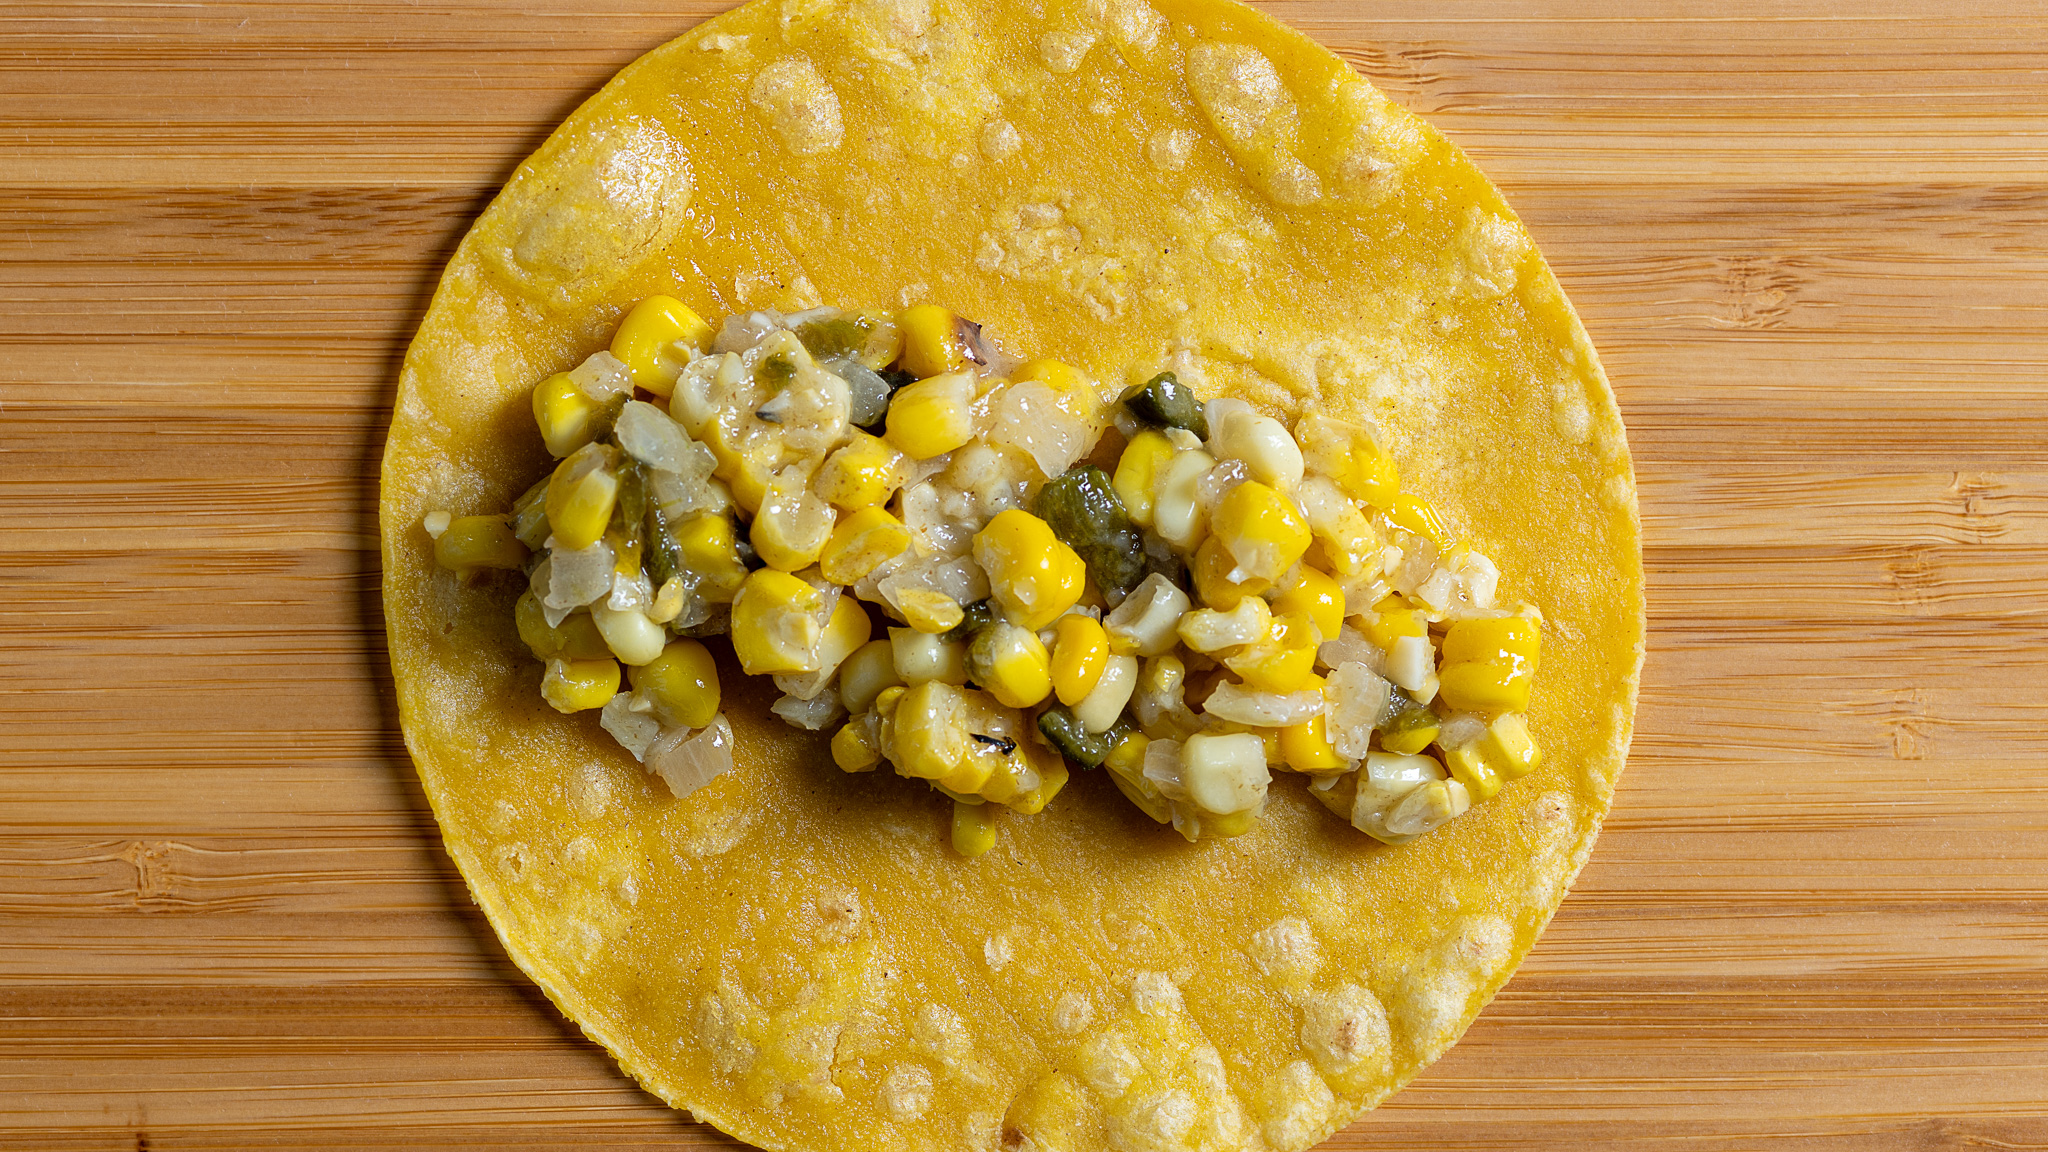 Add ⅓ cup of filling to a lightly fried tortilla.